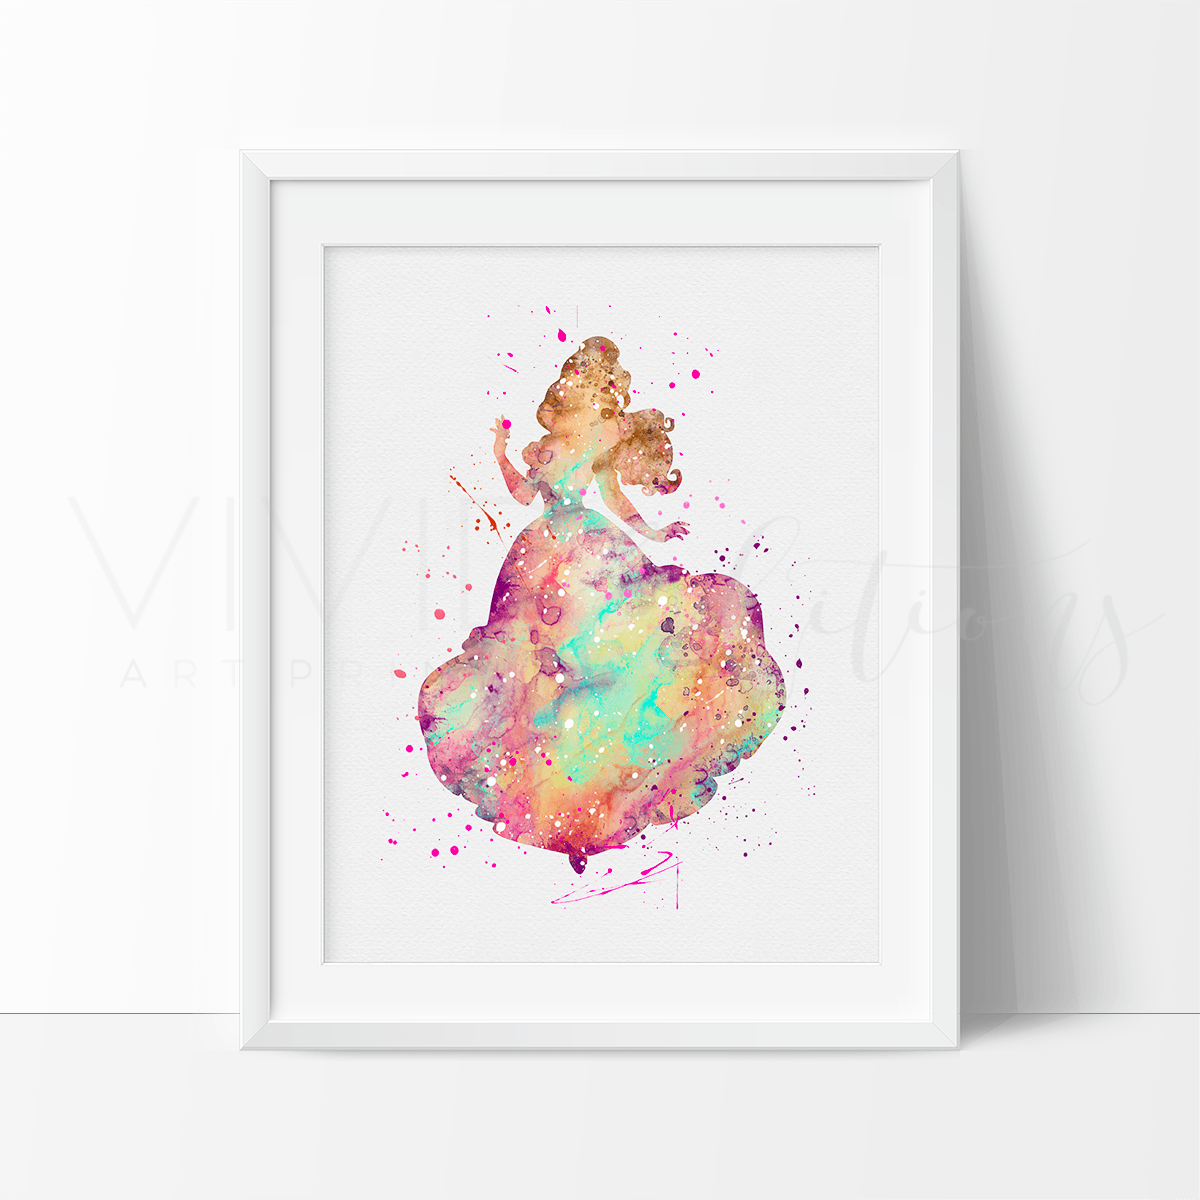 Belle, Beauty and the Beast Watercolor Art Print Print - VividEditions